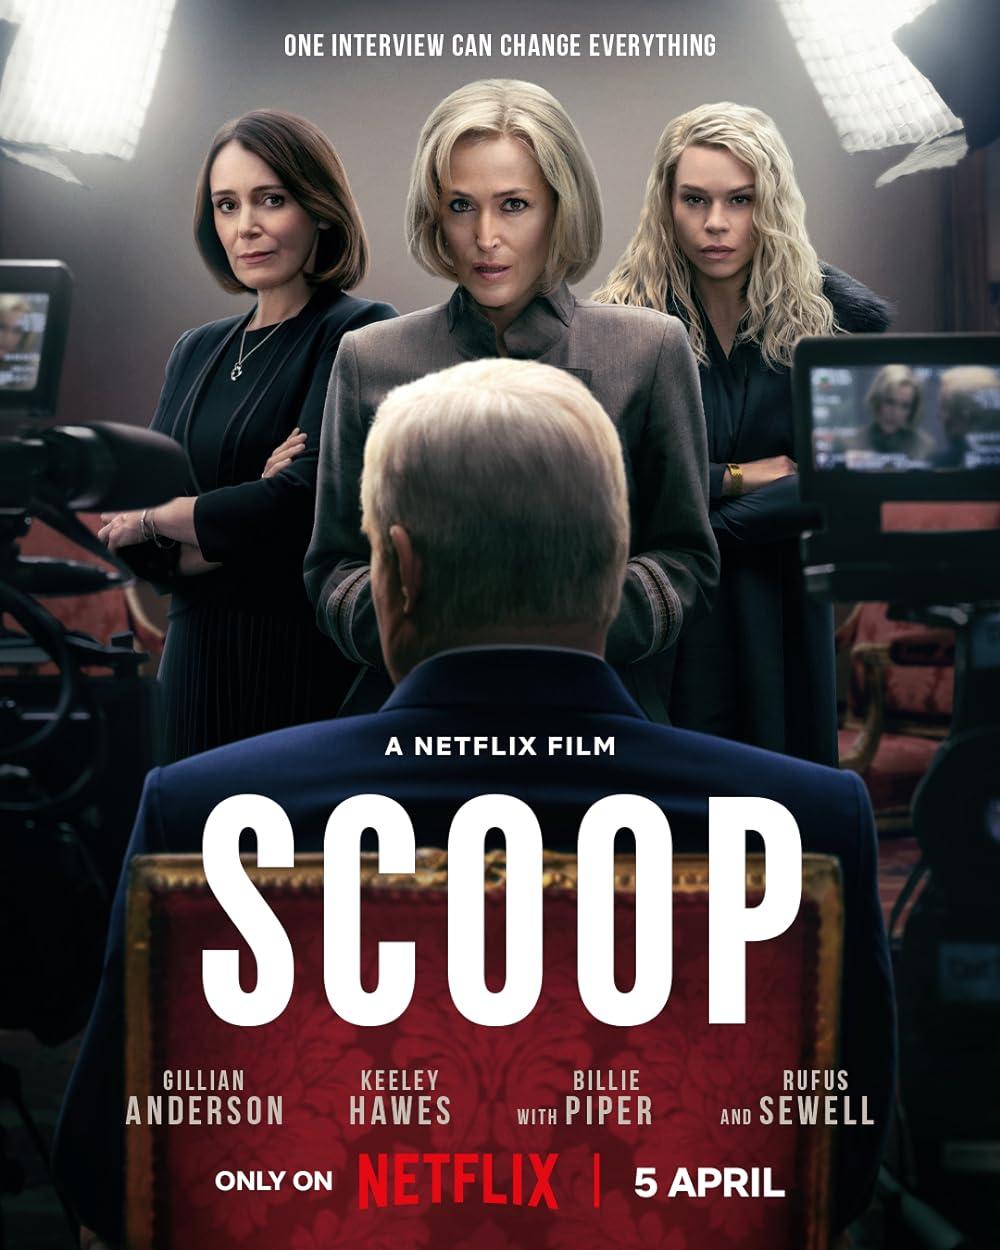 Scoop (April 5, Netflix)Delve into the scandalous world of investigative journalism with Scoop, a riveting drama chronicling the efforts to uncover Prince Andrew's controversial interview. With an all-star cast and compelling storytelling, Scoop offers a behind-the-scenes look at the pursuit of truth in the media.